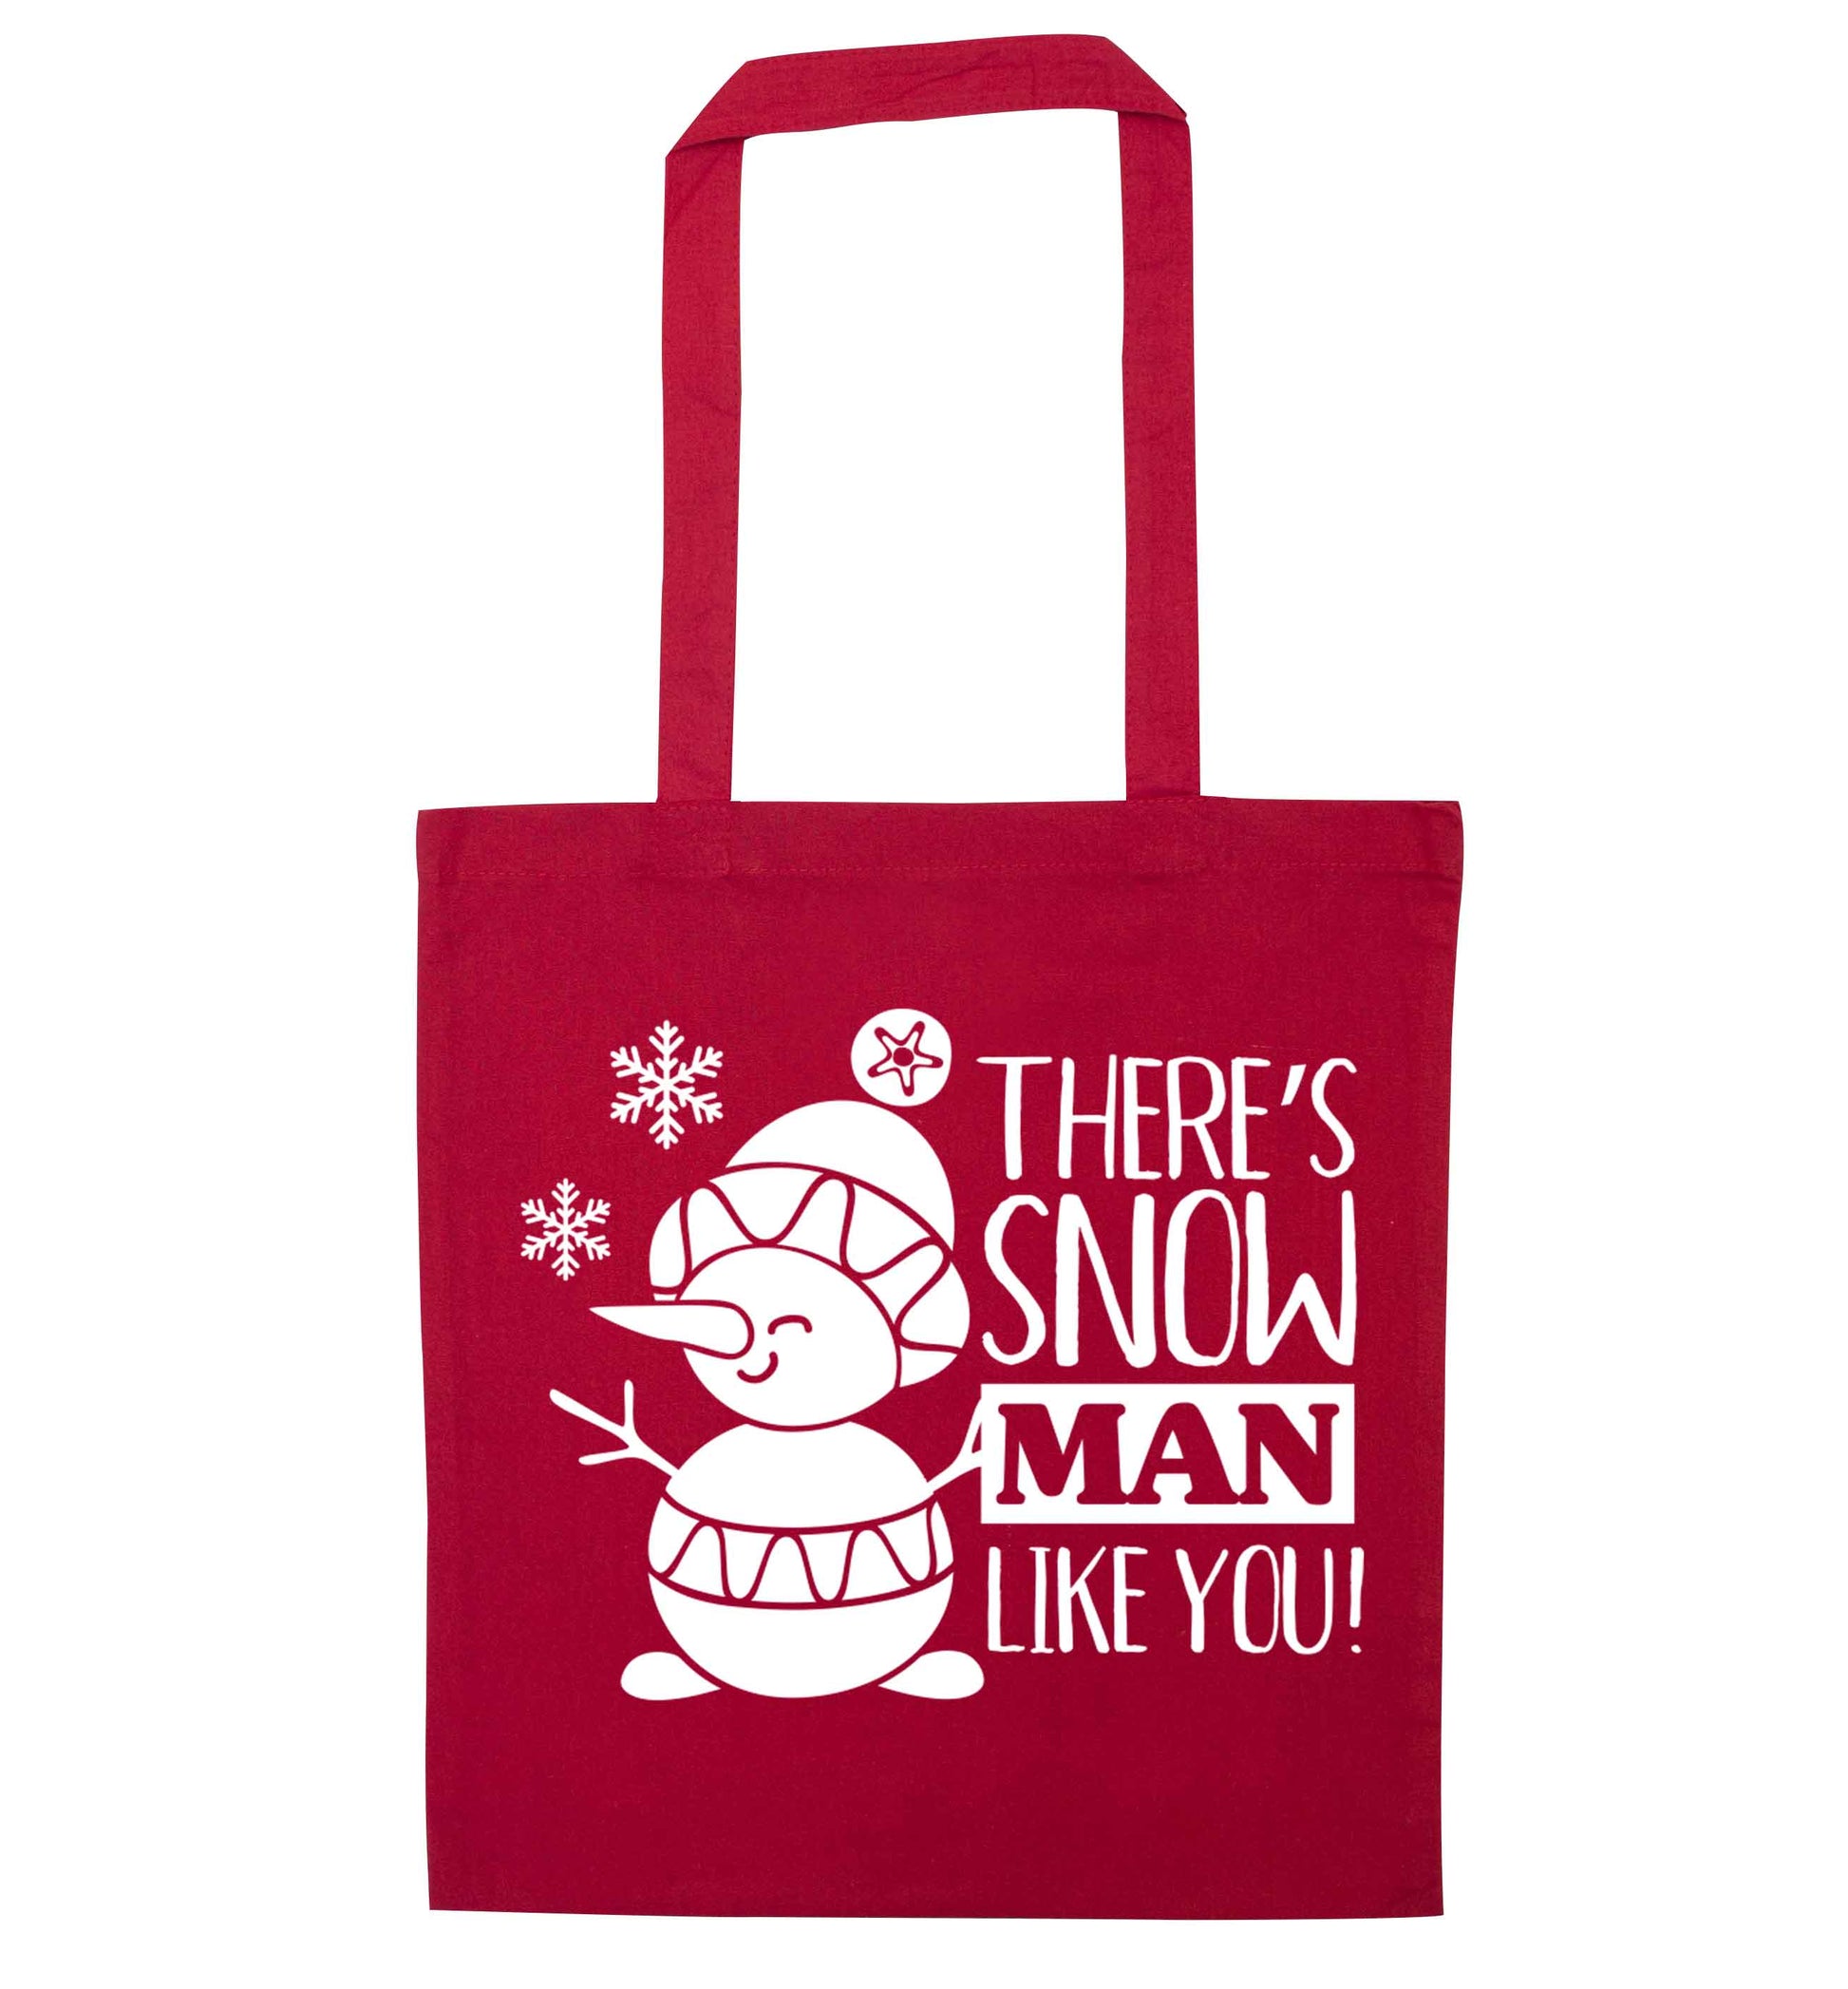 There's snow man like you red tote bag